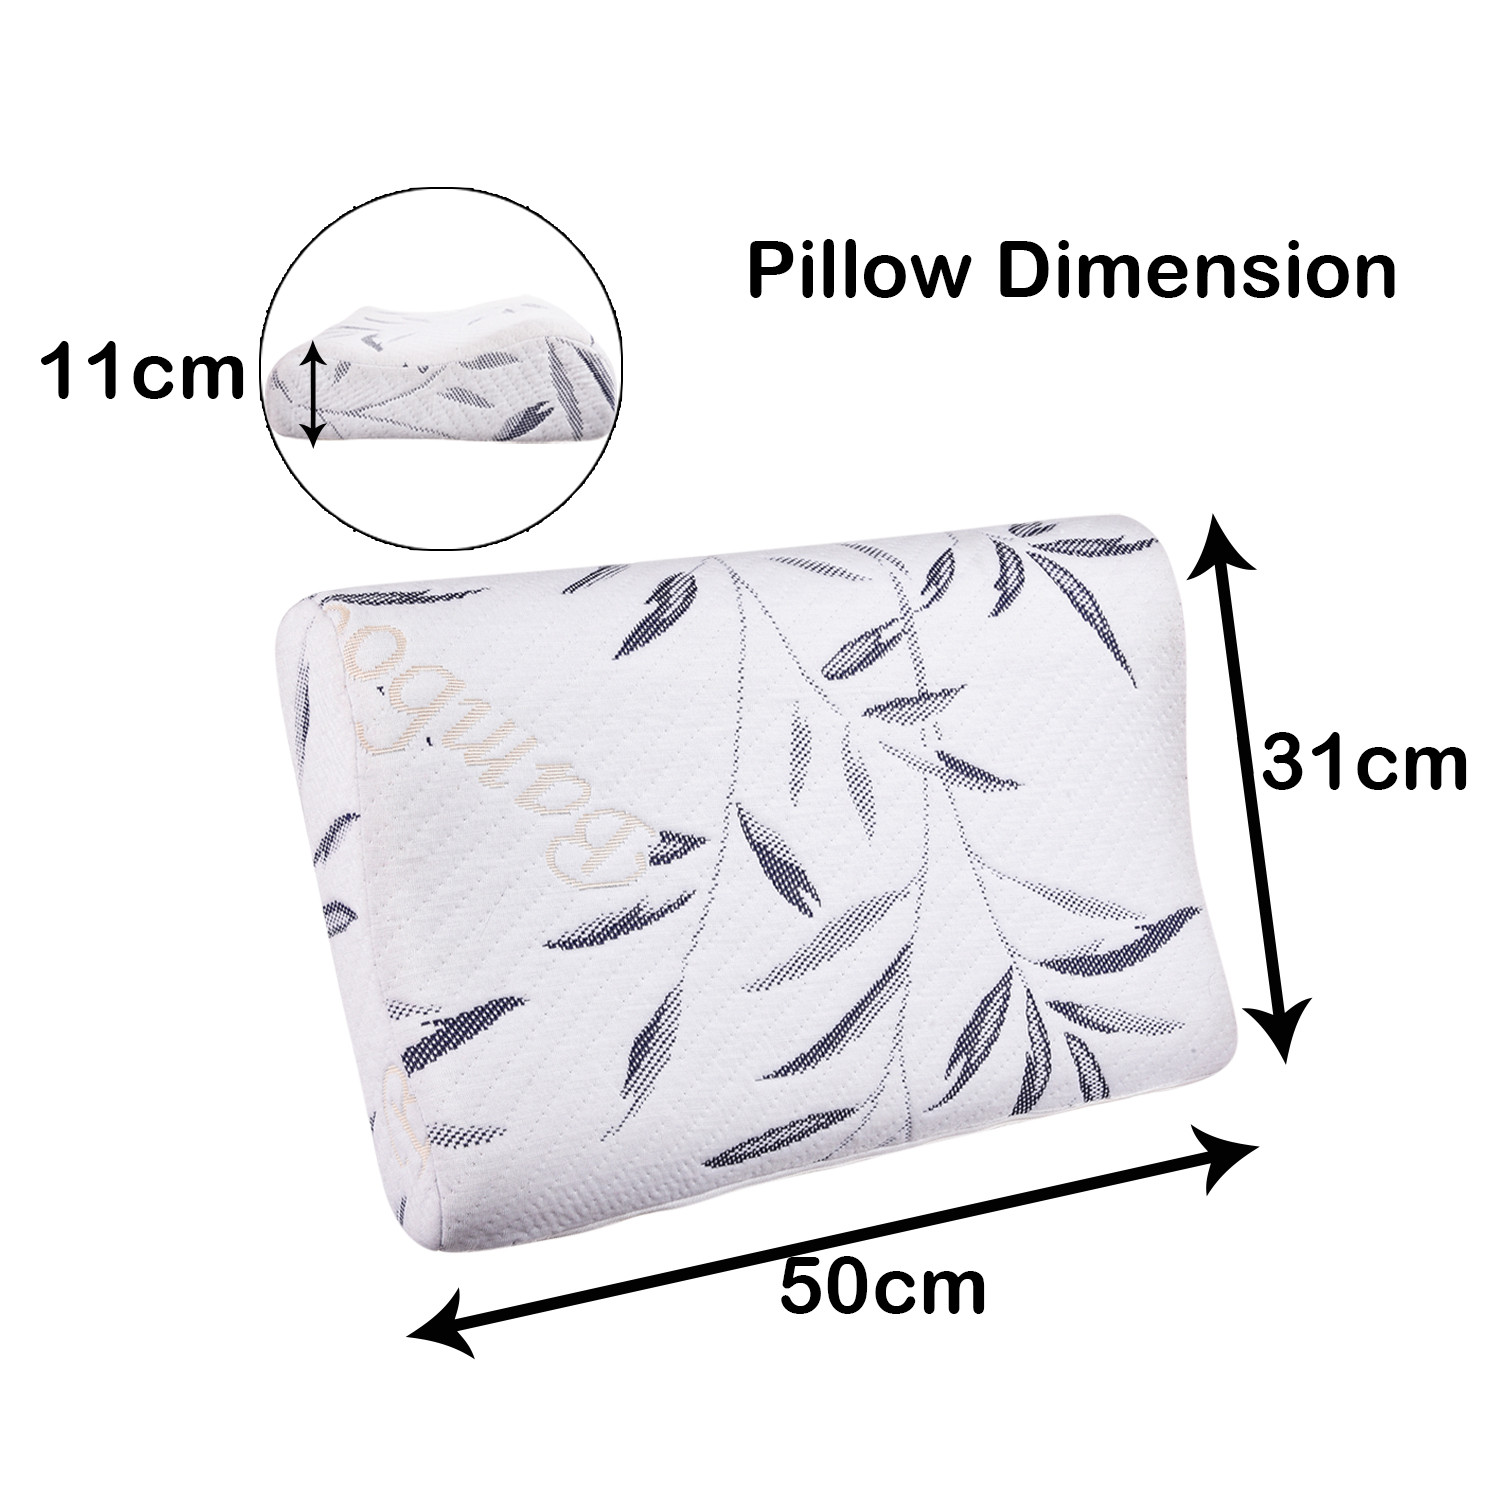 Kuber Industries Contoured Pillow| Memory Foam Support Pillow | Contour Cervical Pillow for Neck and Shoulder Pain| Bed Pillows for Sleeping with Washable Cover | White